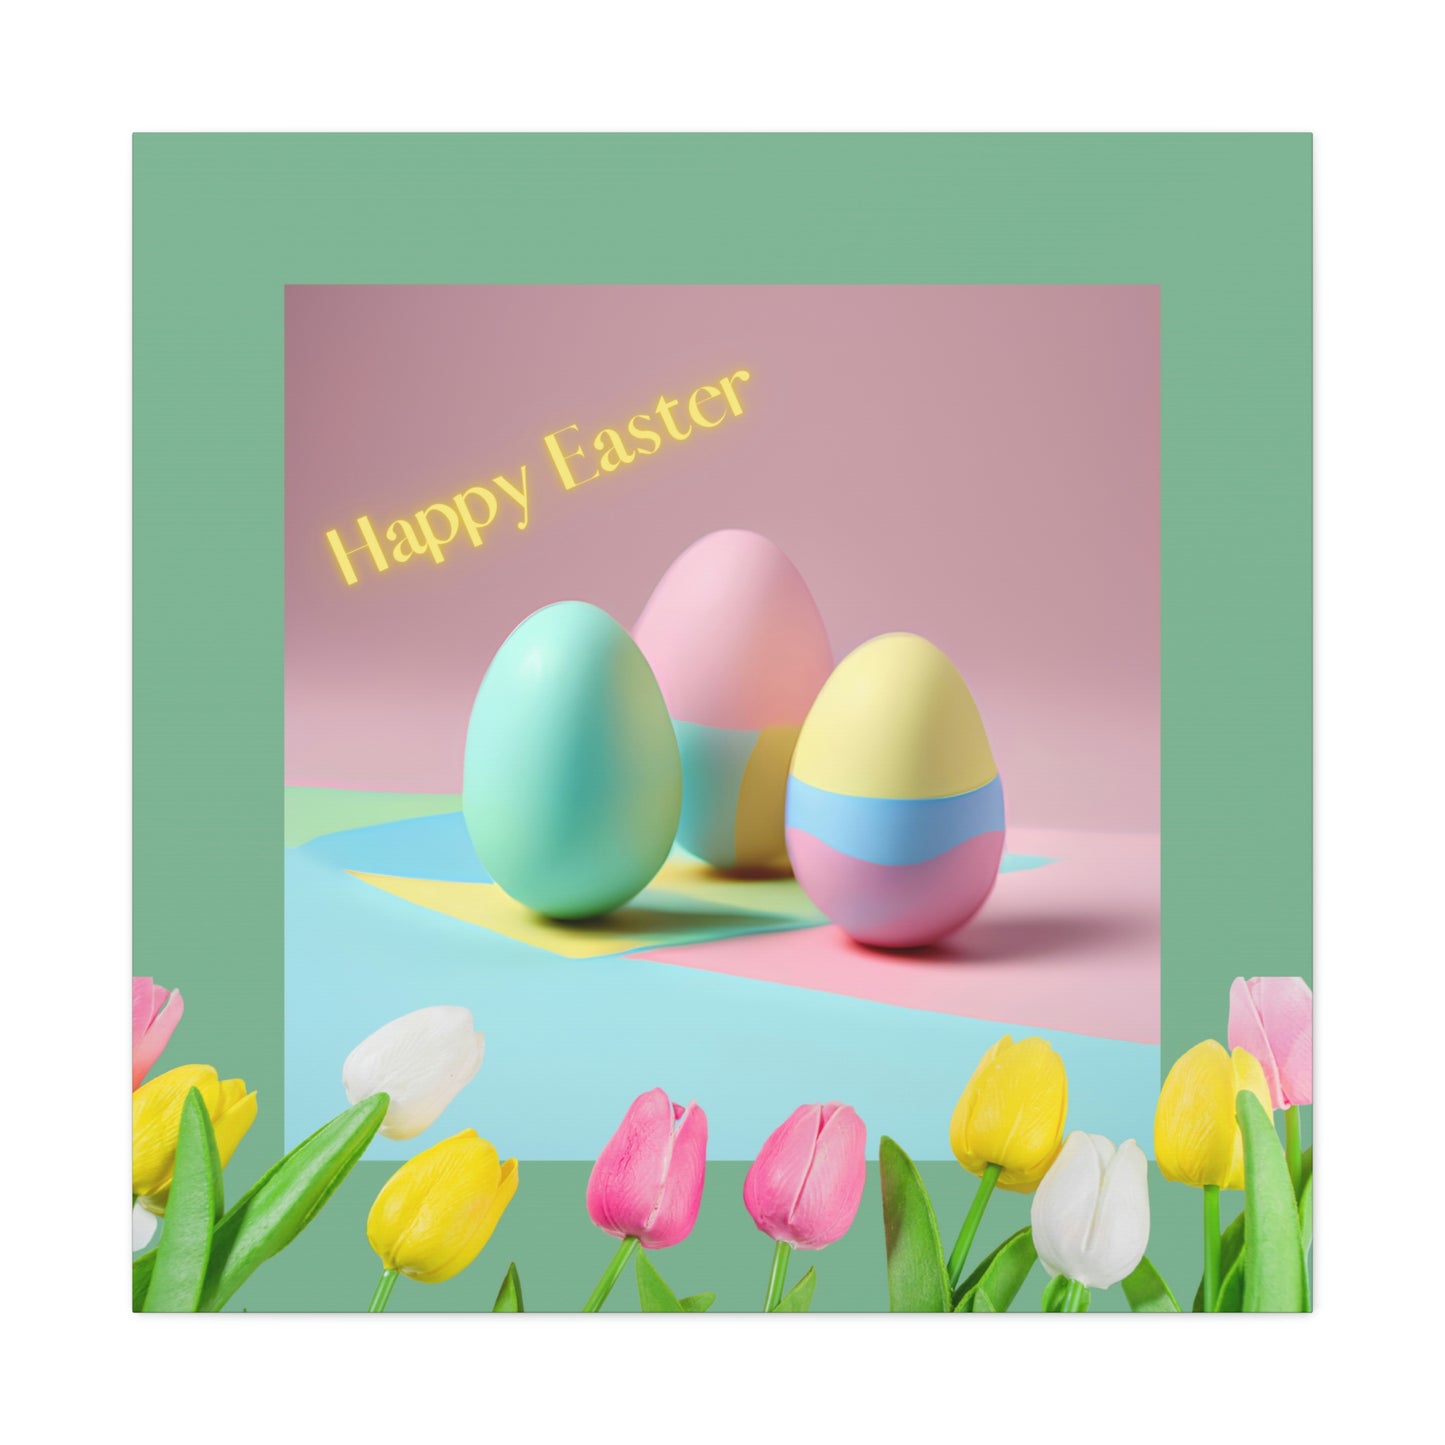 Happy Easter - Eggs and Tulips